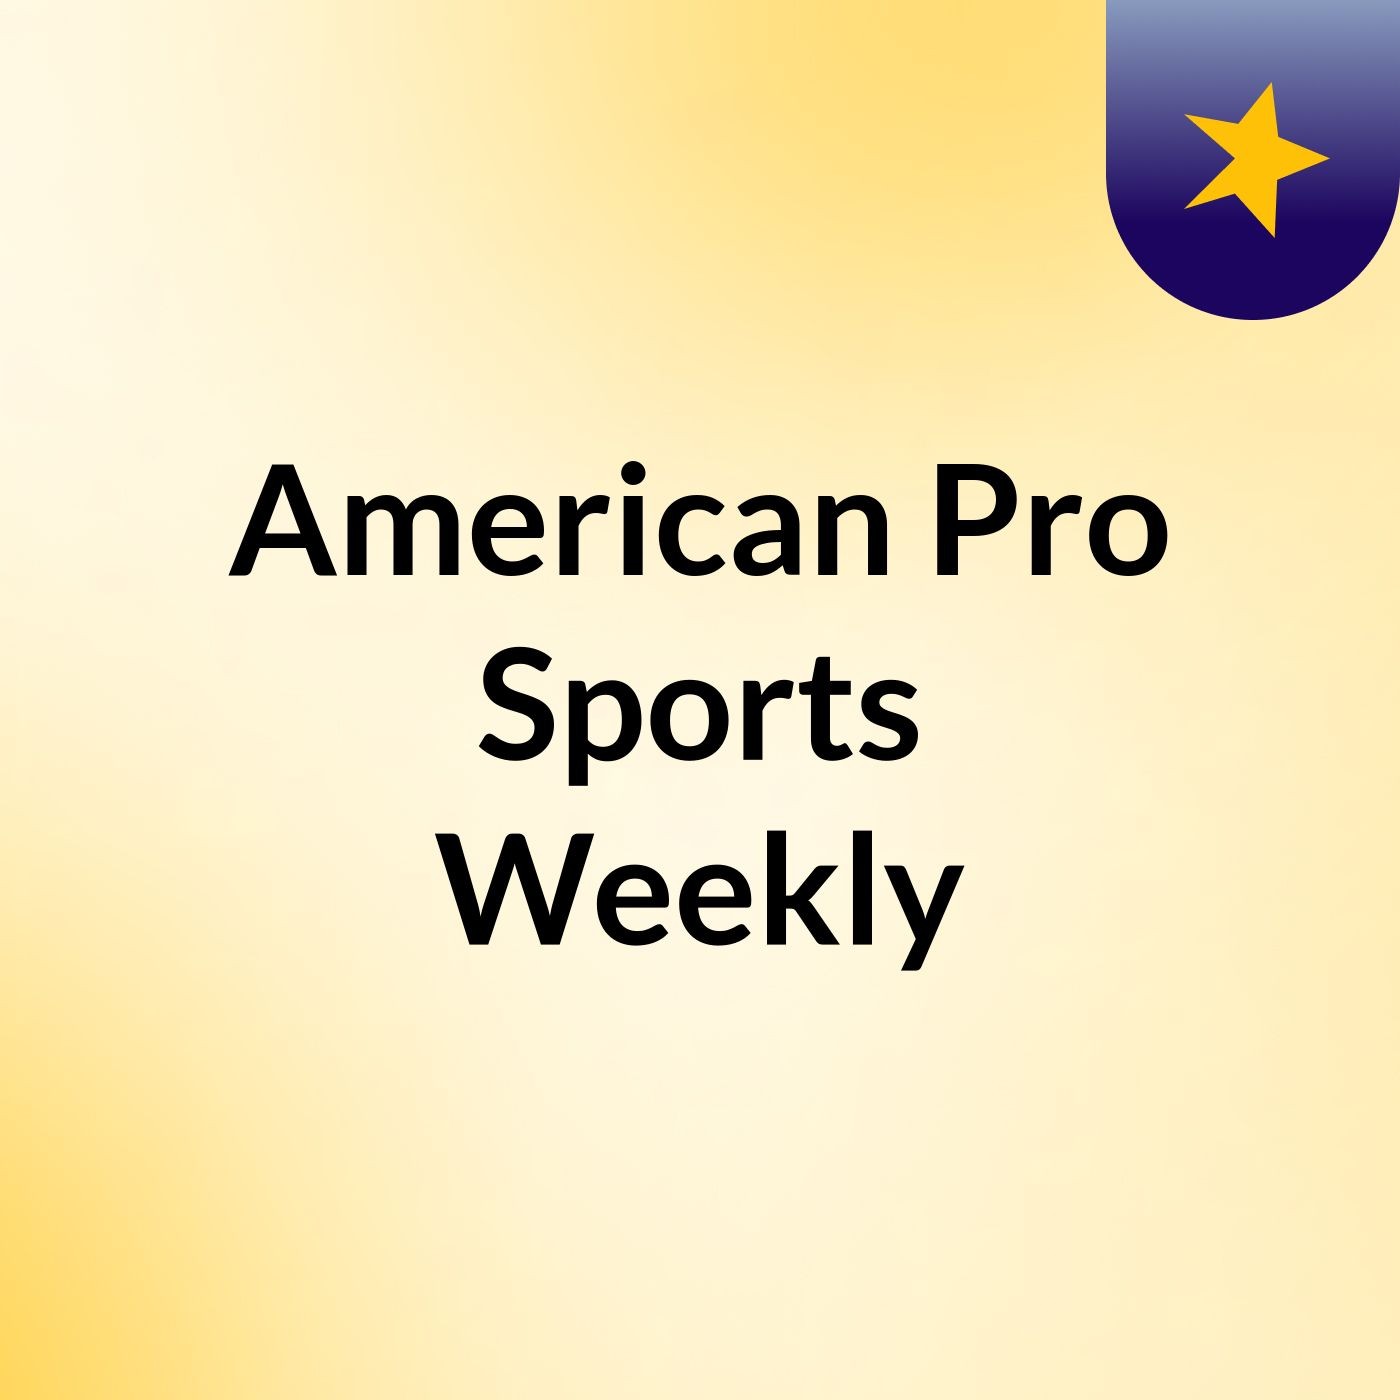 American Pro Sports Weekly